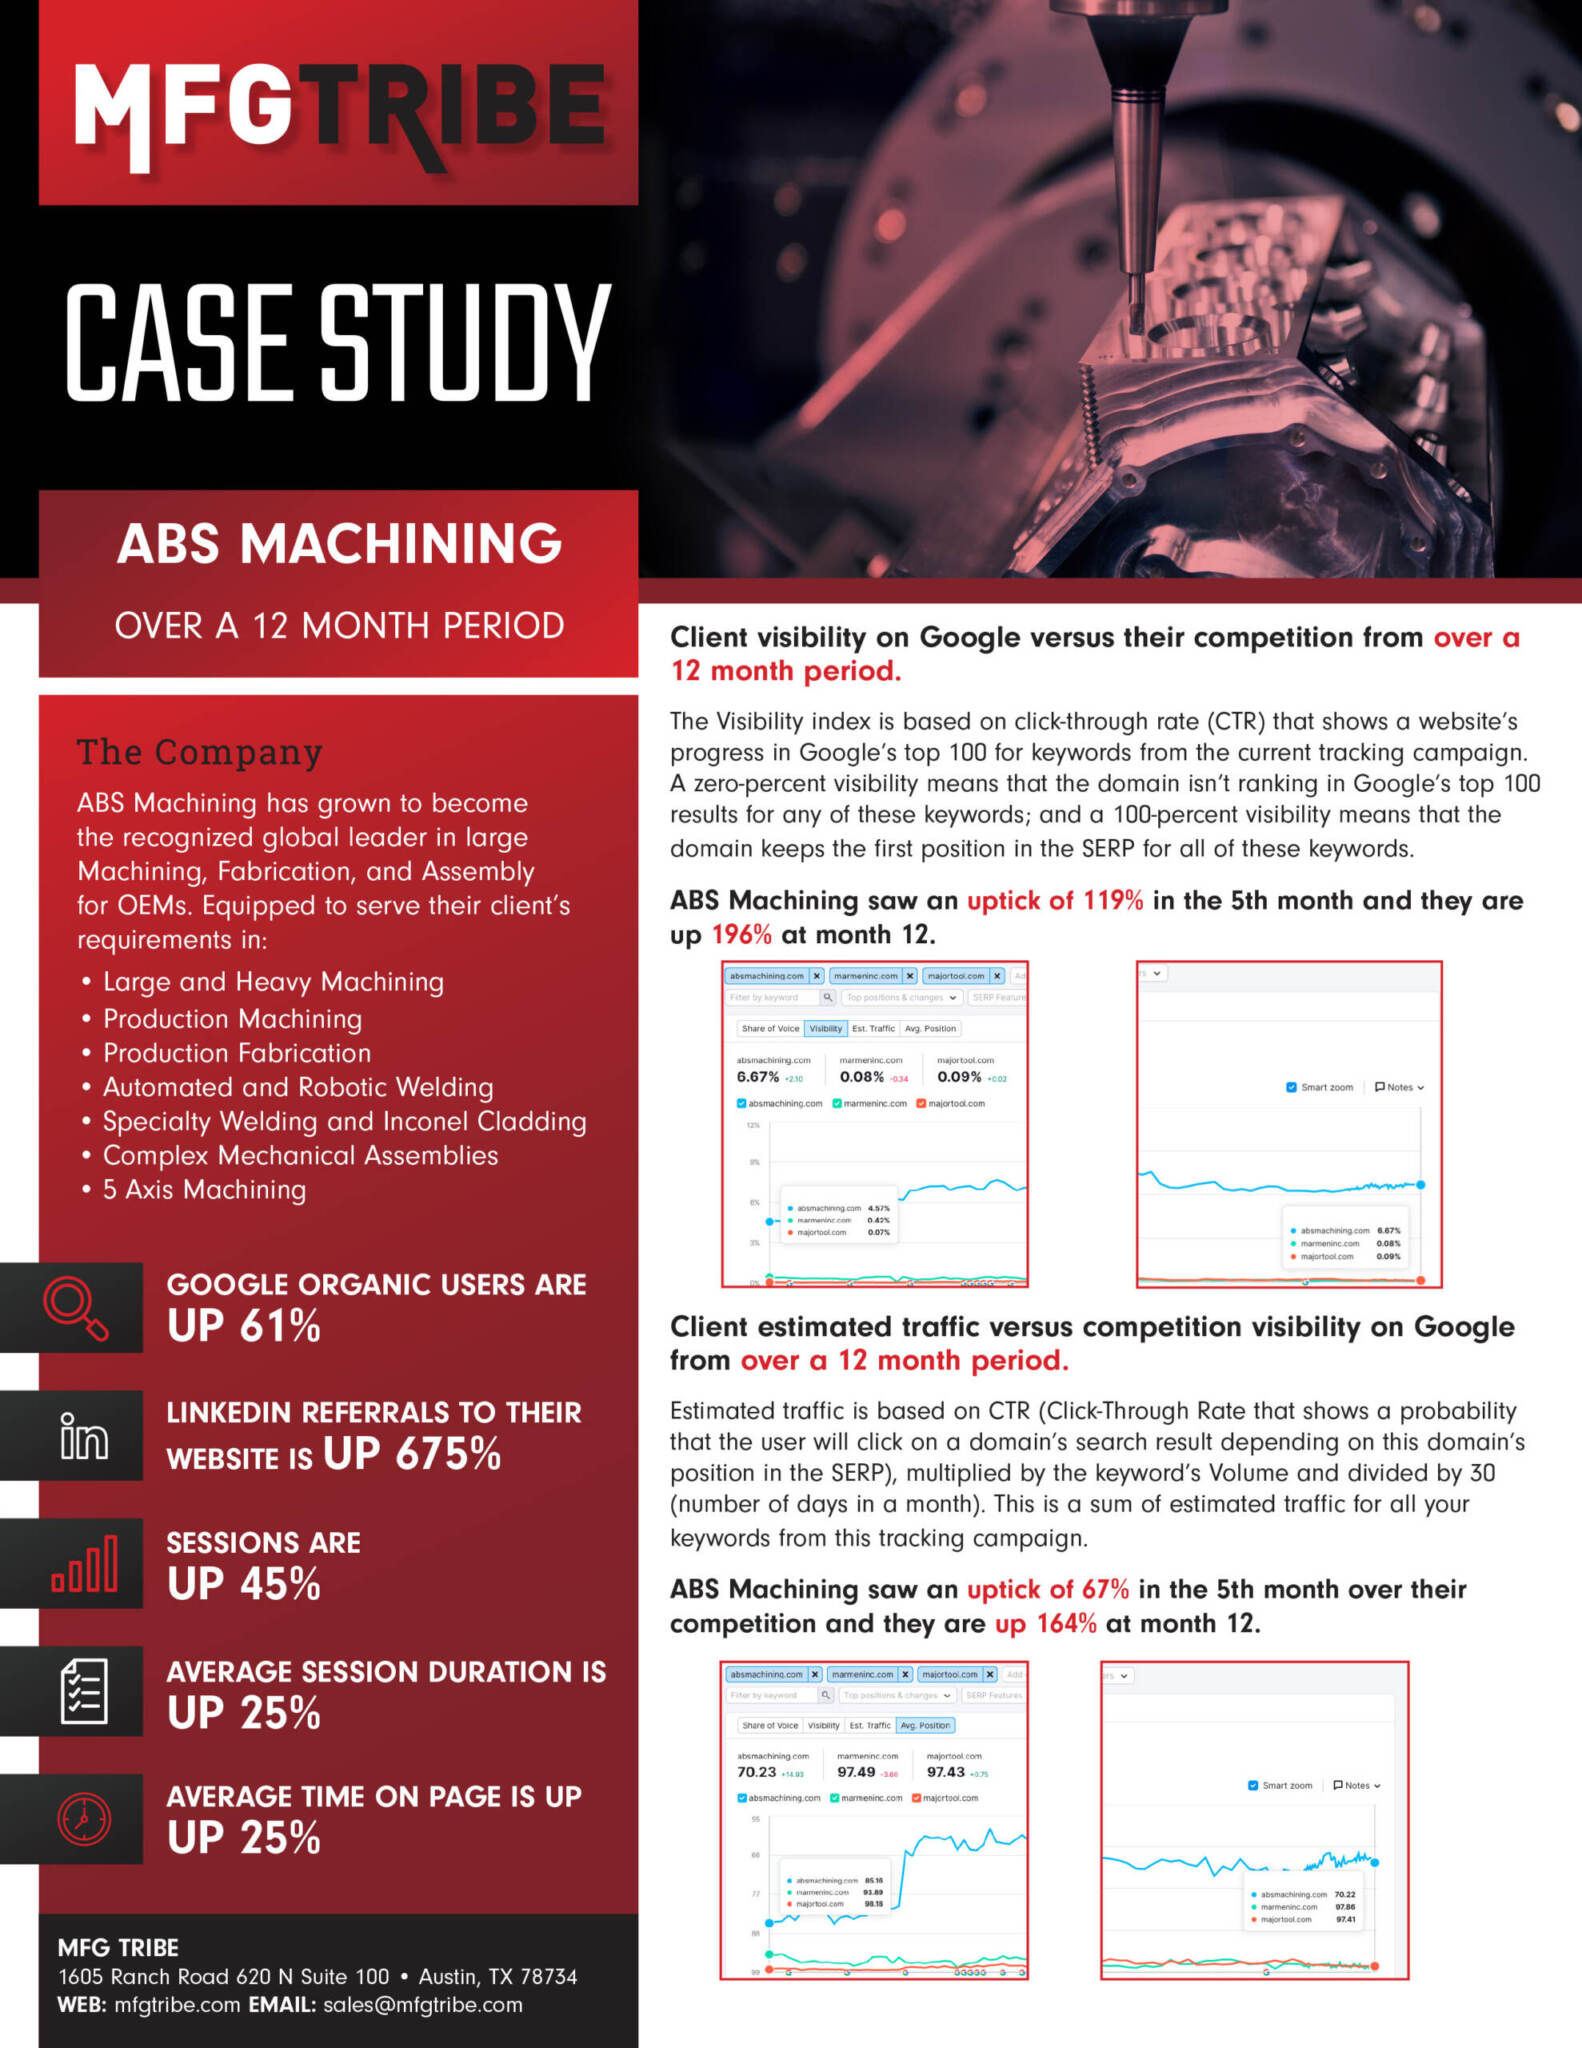 Case study showing industrial marketing efforts for ABS Machining